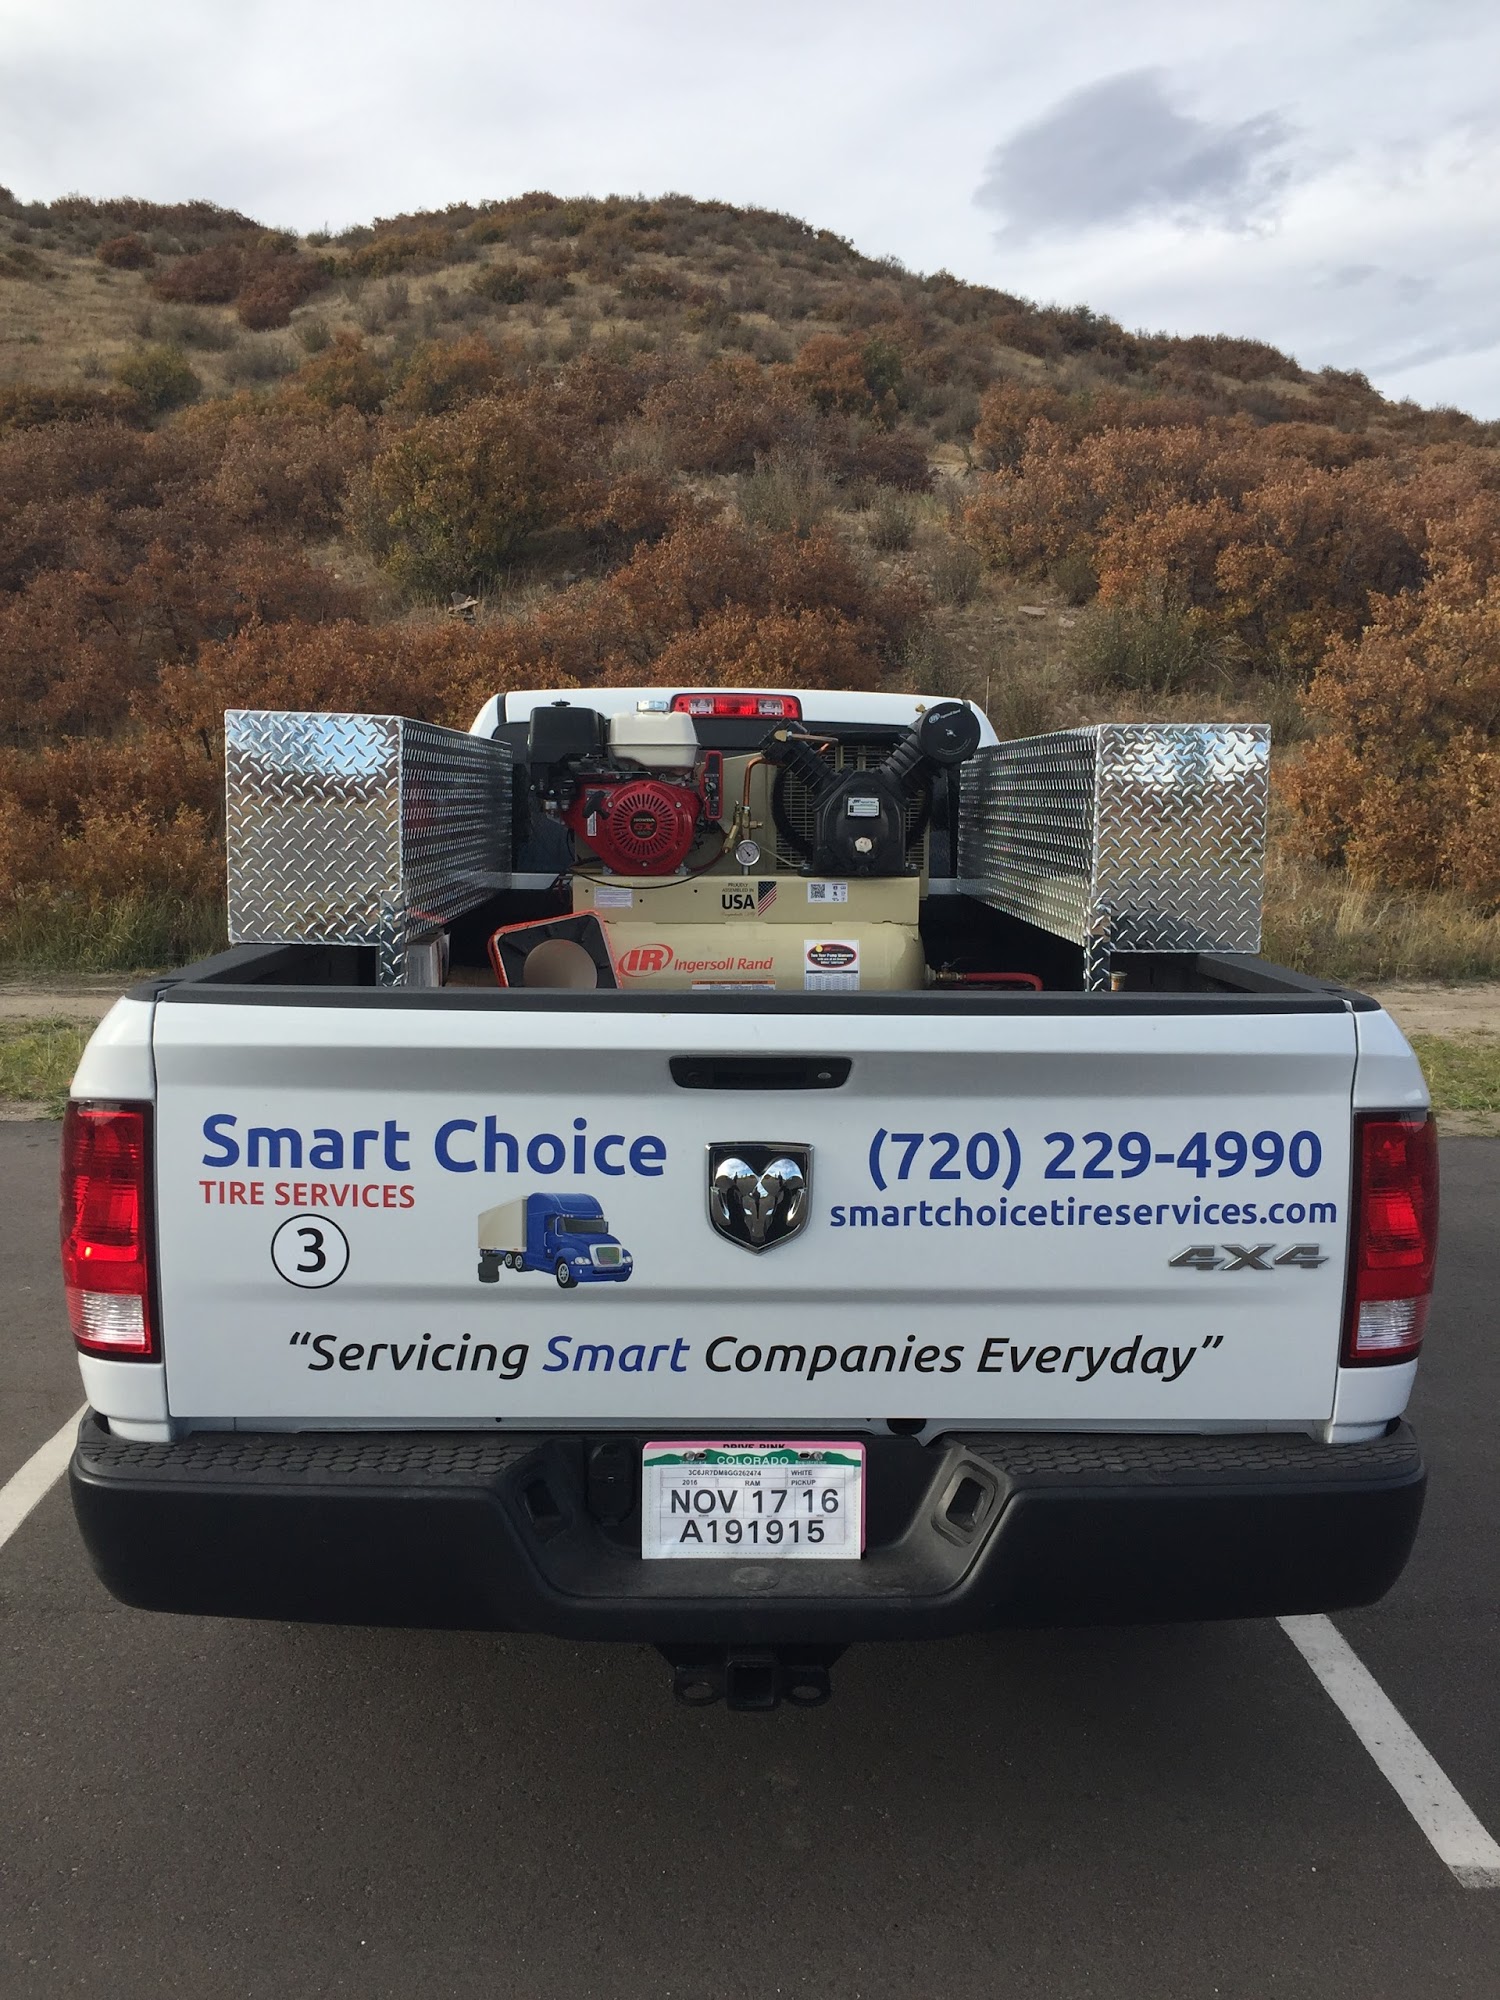 Smart Choice Tire Services